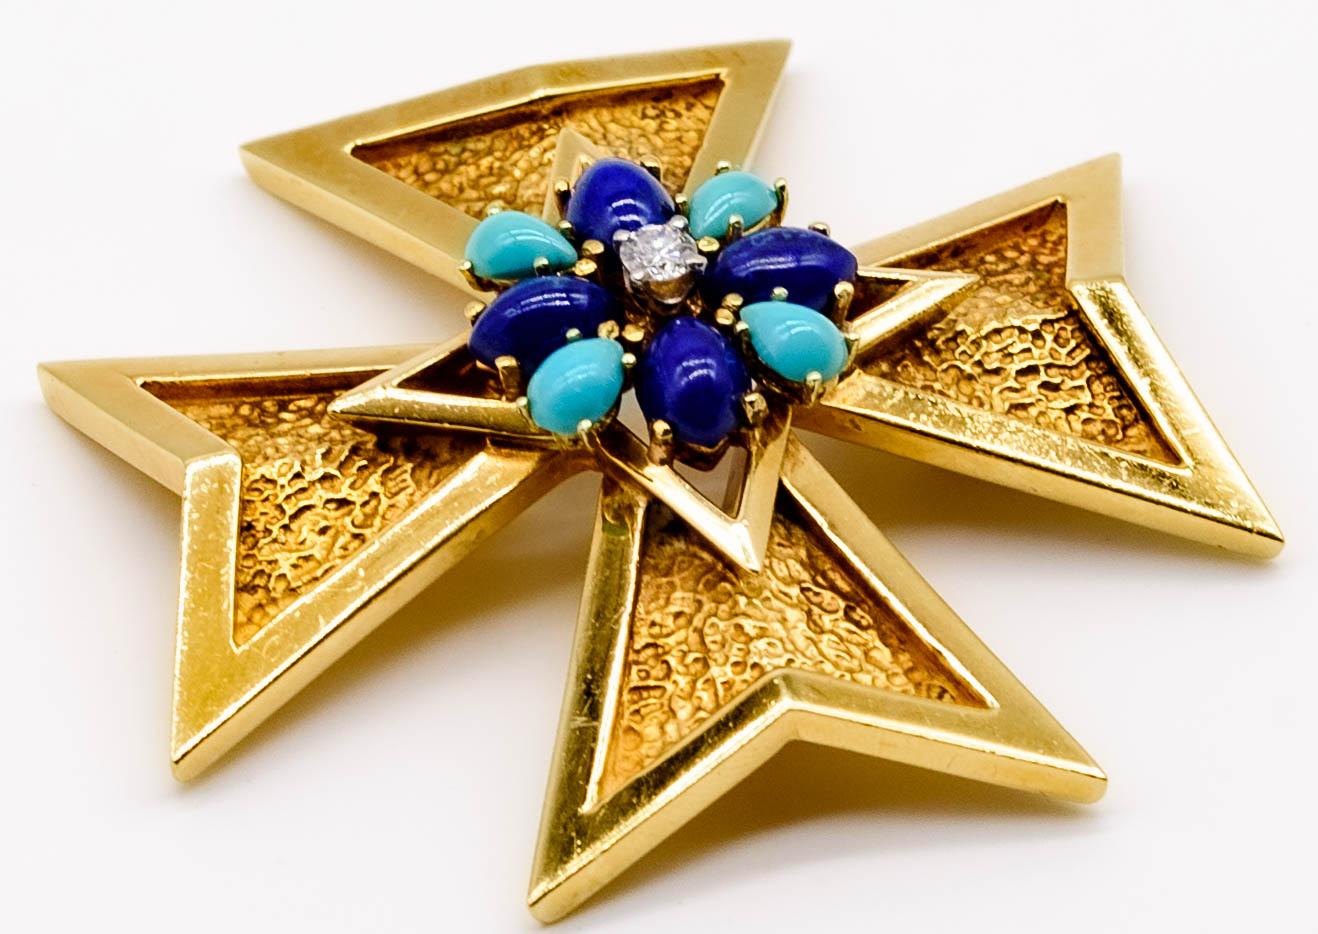 Strong in line, color, and style, this elegant Maltese style cross is a perfect accessory not just for the holidays but for any time of year.  Beautifully textured gold arms, all equidistant from the center, surround a center motif of rich navy